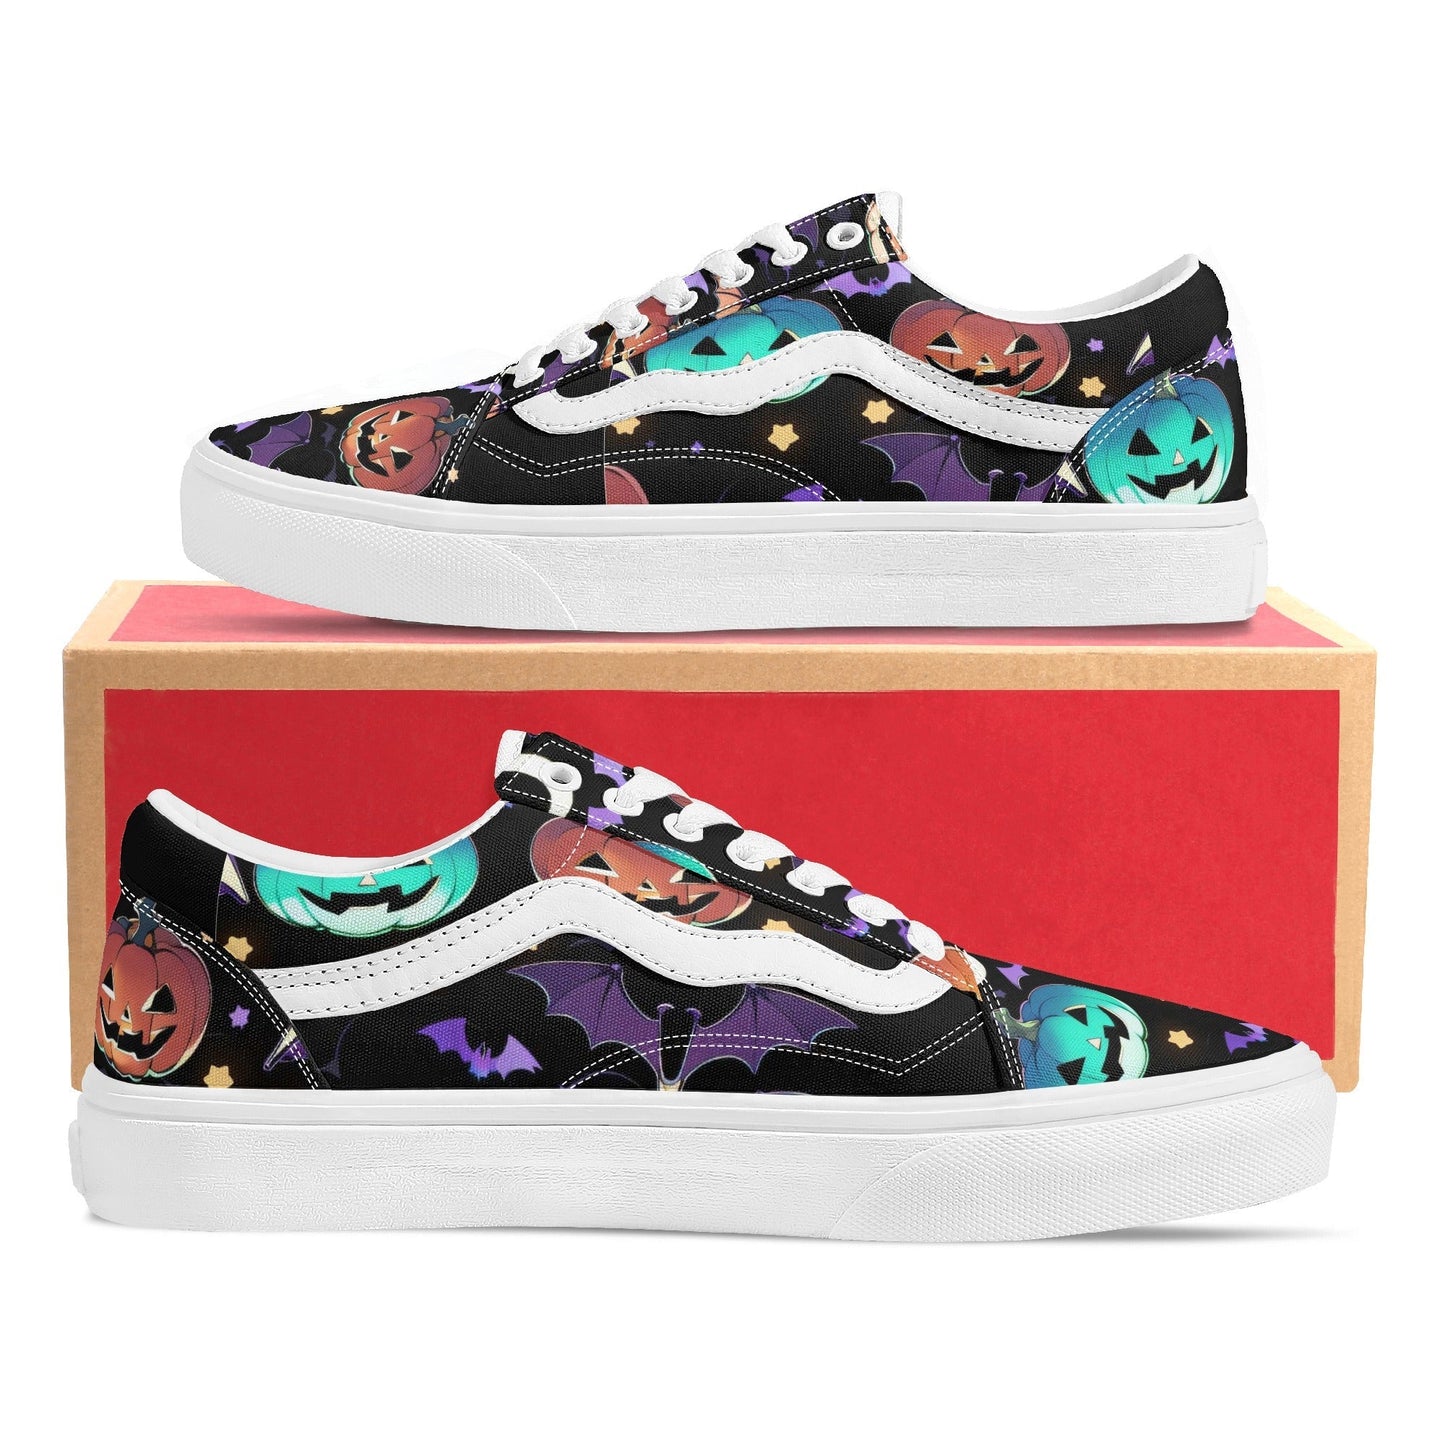 Stand out  with the  Nuggieween Womens Low Top Sneakers  available at Hey Nugget. Grab yours today!